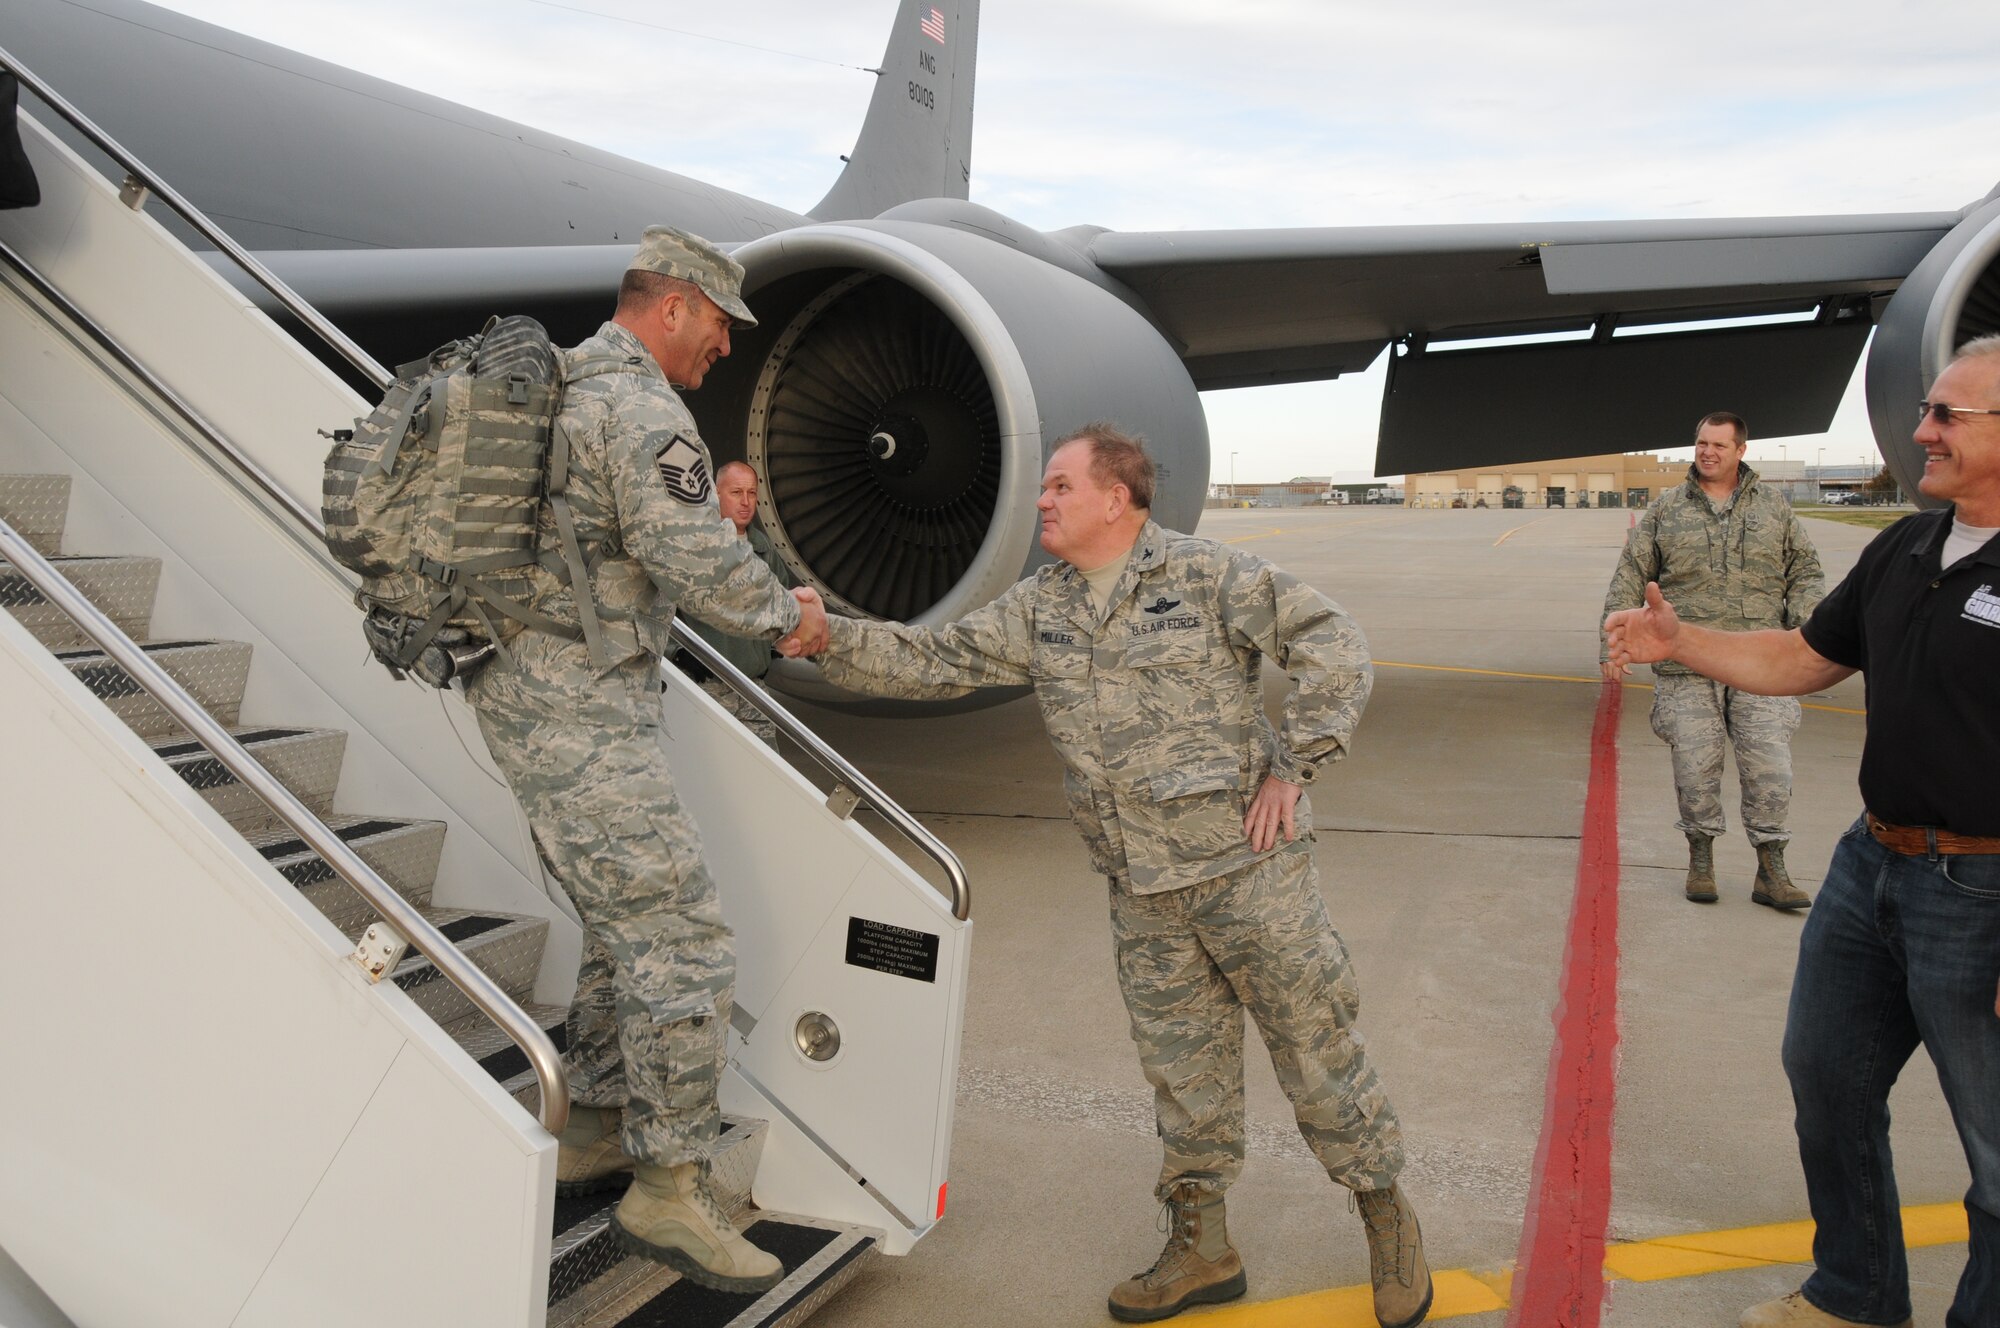 Colonel Brian Miller, Commander of the 185th Air Refueling Wing, Sioux City, Iowa, along with his staff, greets Master Sergeant Michael Loghry and his fellow Security Forces members as they return home after a six month deployment to an undisclosed location in the South-west Asian theater of operations on 17 October 2012. (US Air Force photo by TSgt Brian Cox)